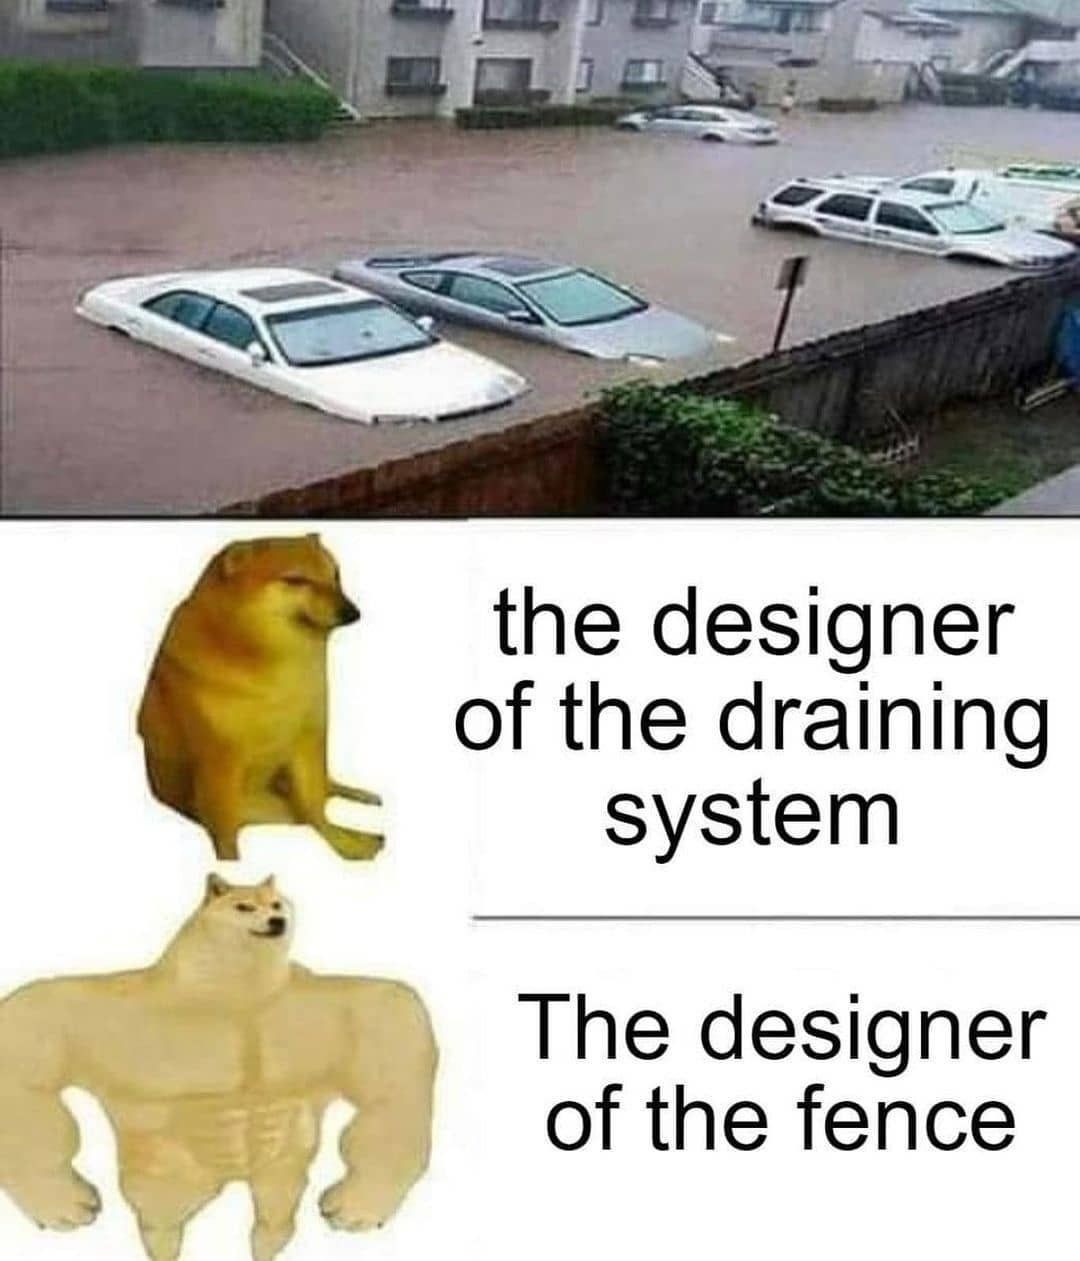 The designer of the draining system.  The designer of the fence.